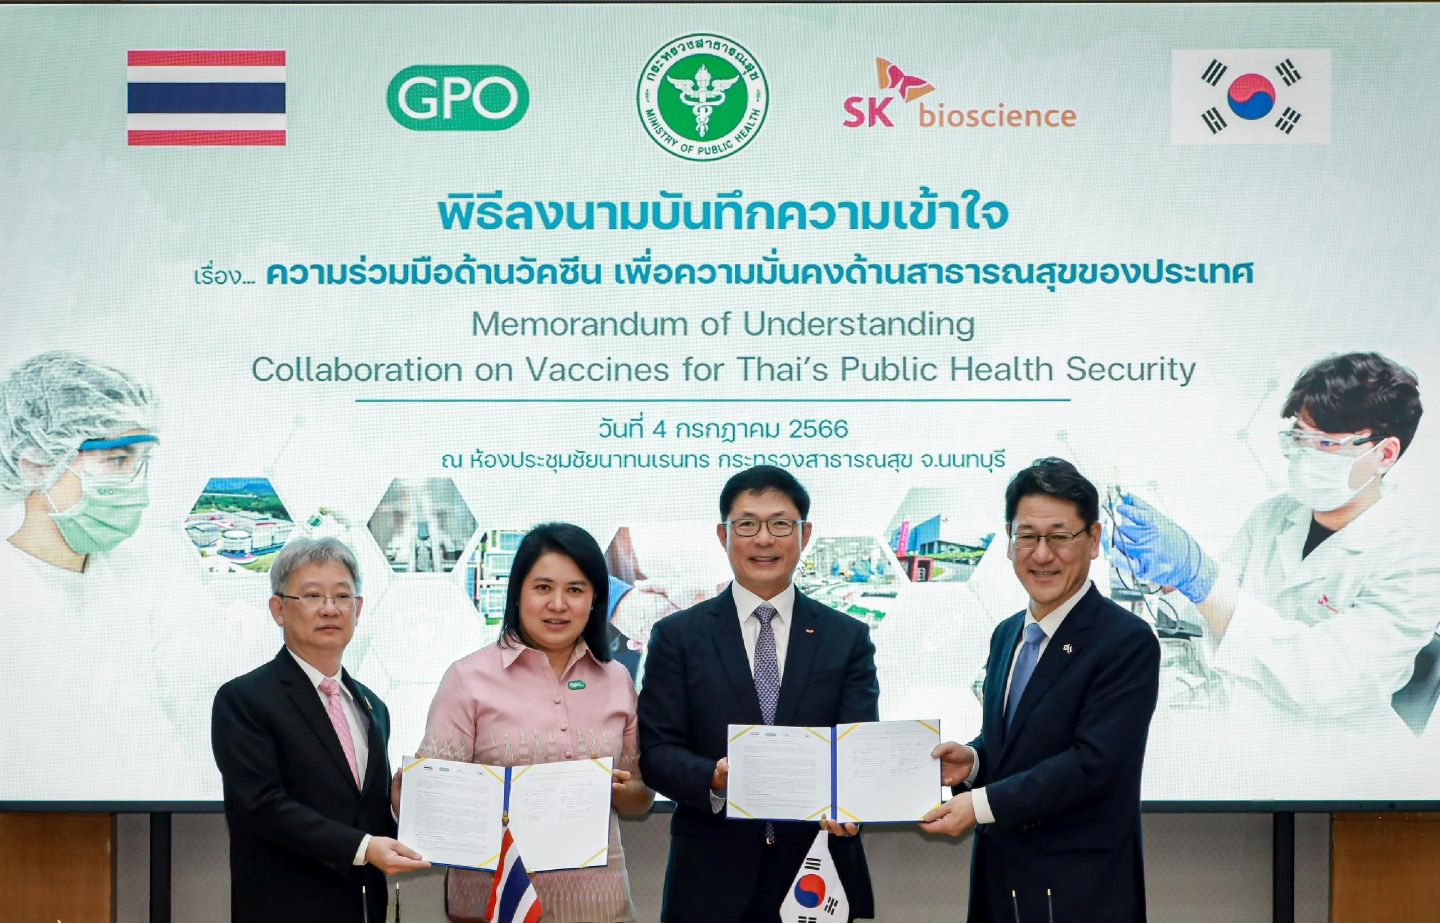 SK bioscience and Thailand’s GPO enter MoU to boost vaccine response